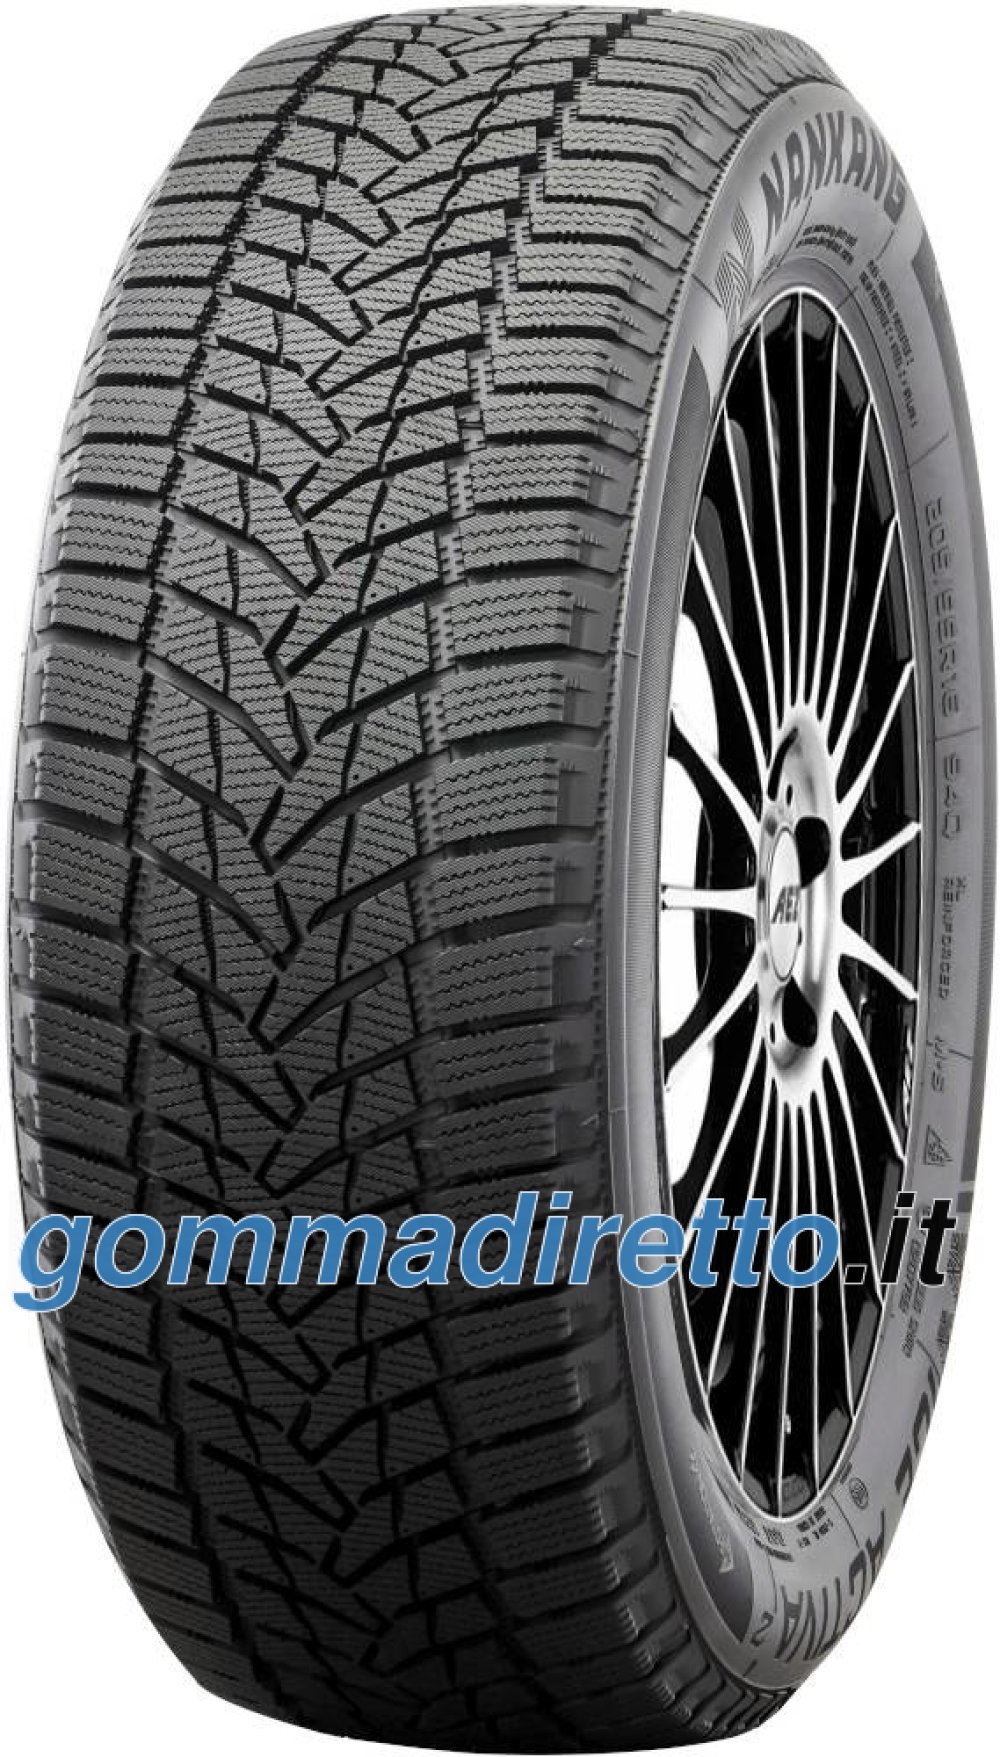 Image of Nankang ICE ACTIVA 2 ( 275/40 R20 106T XL, Nordic compound )